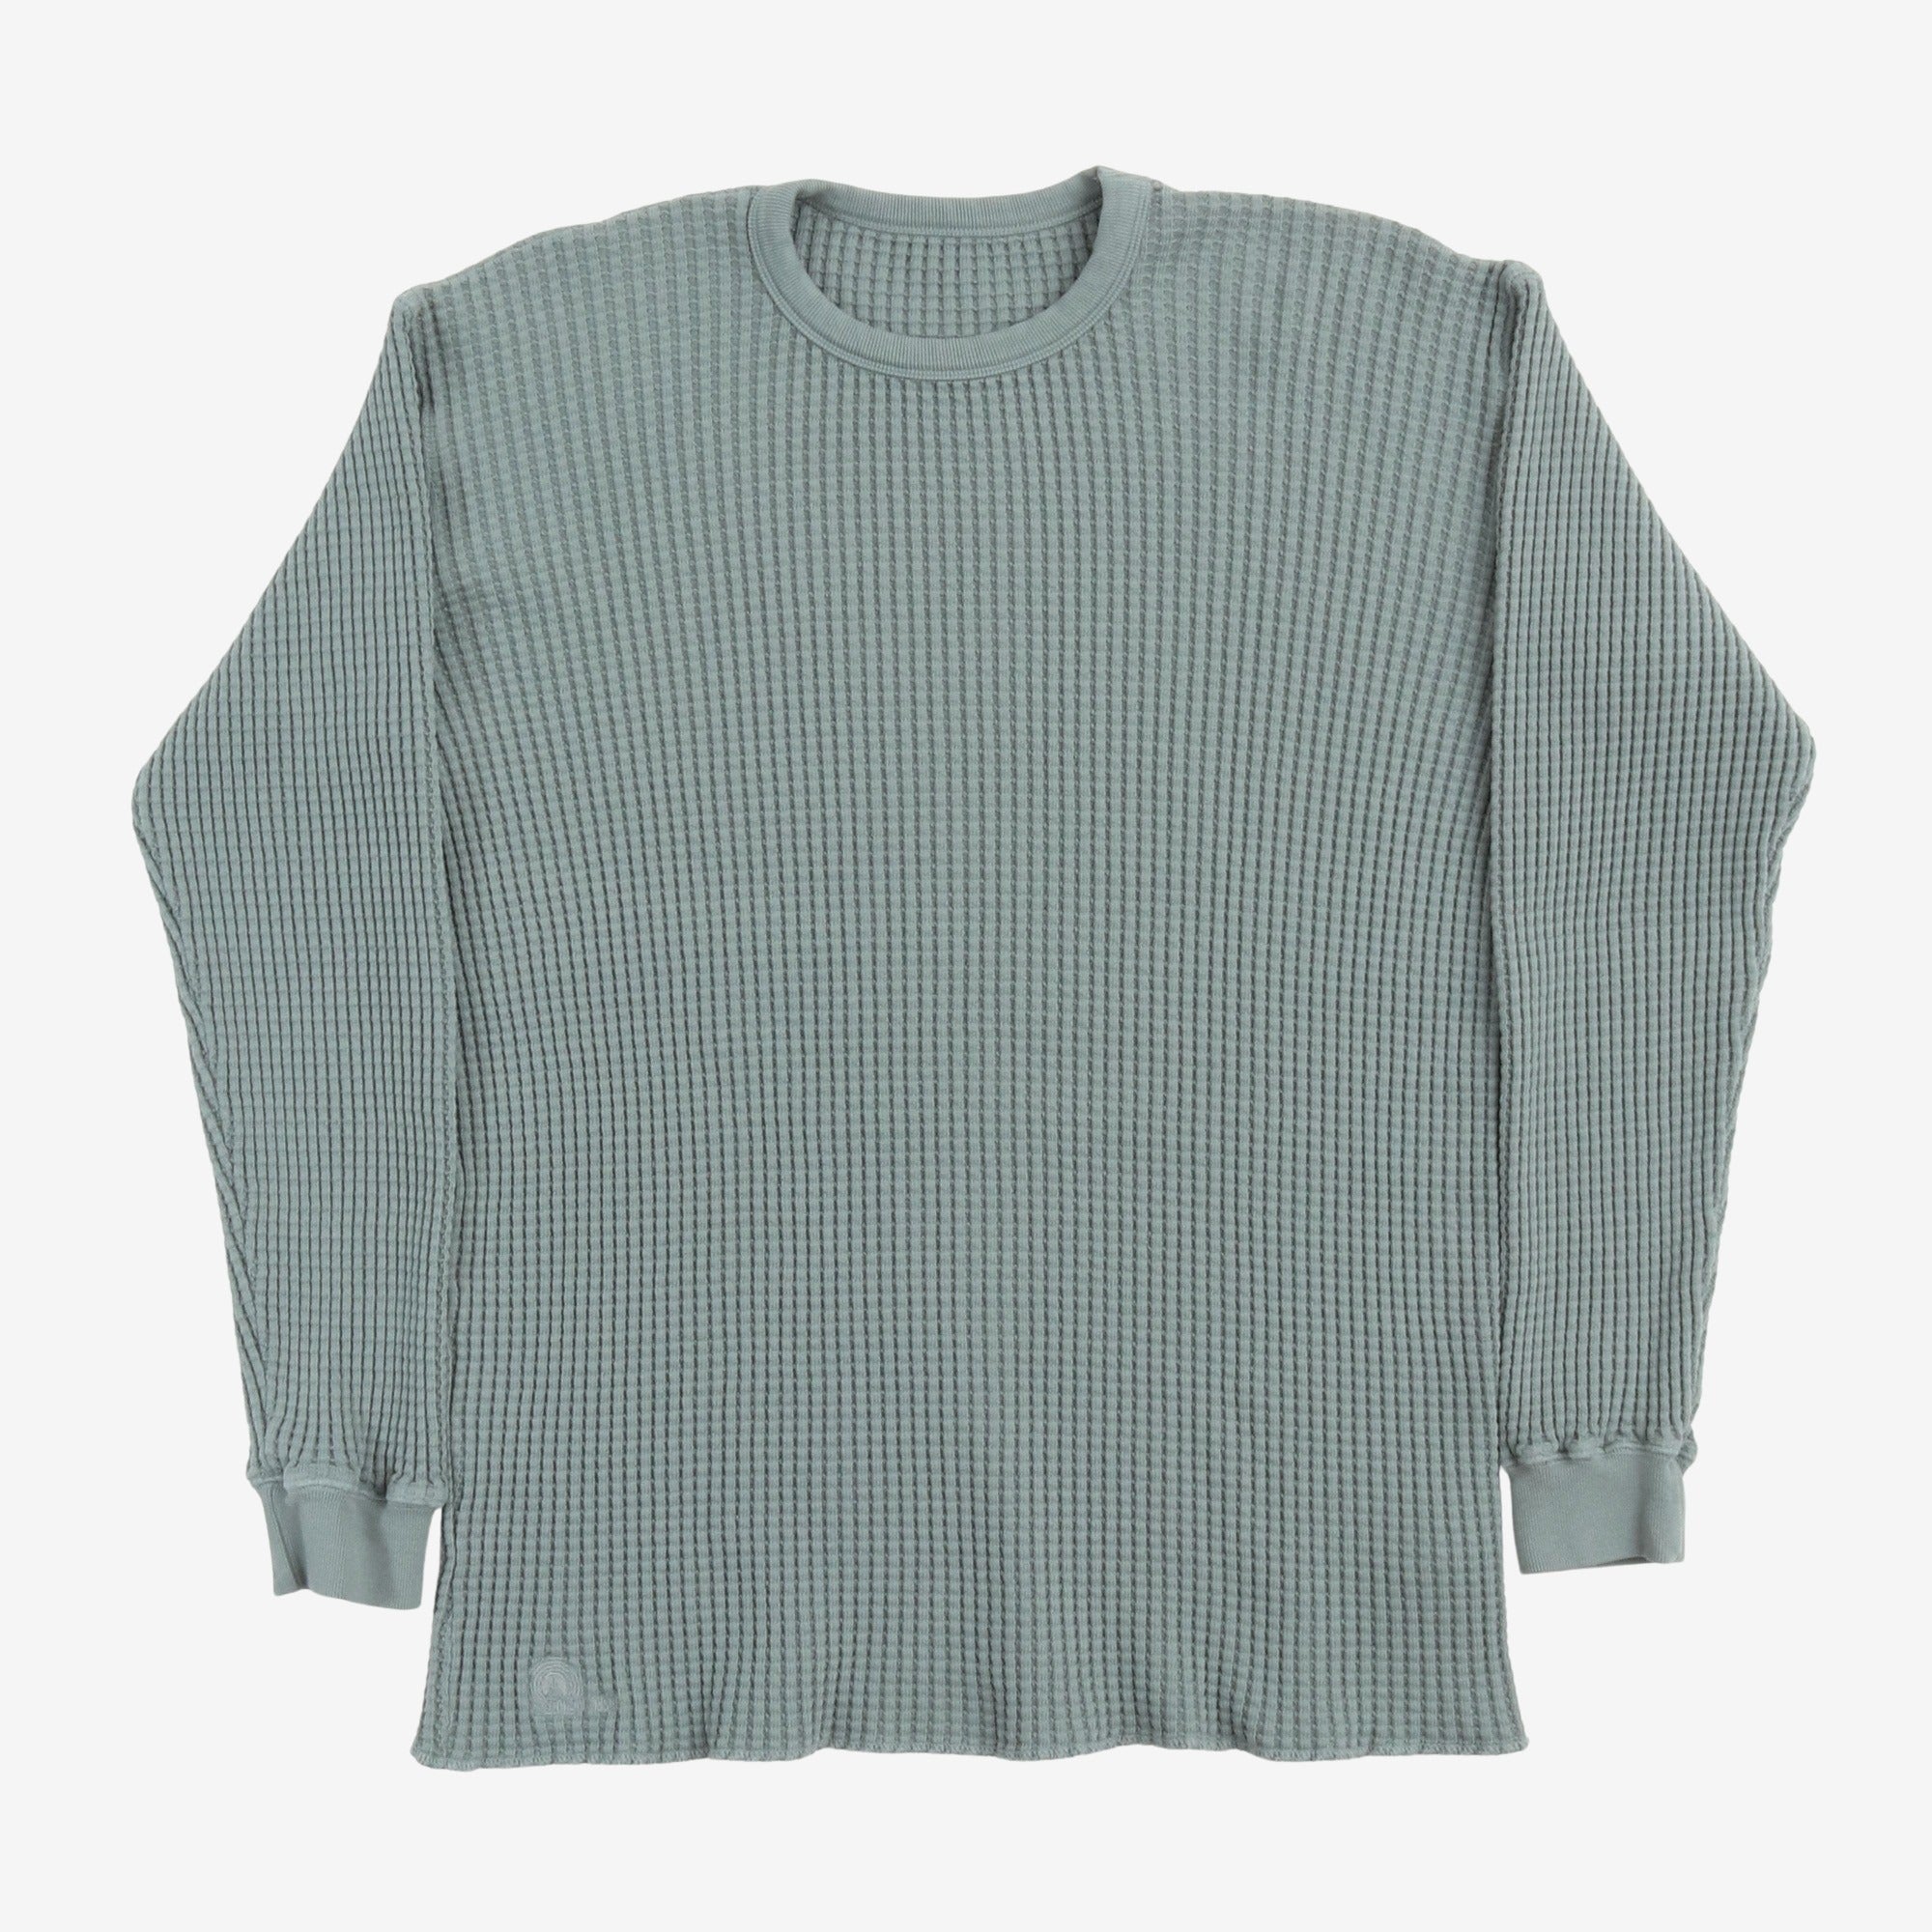 Standard Issue Thermal Top